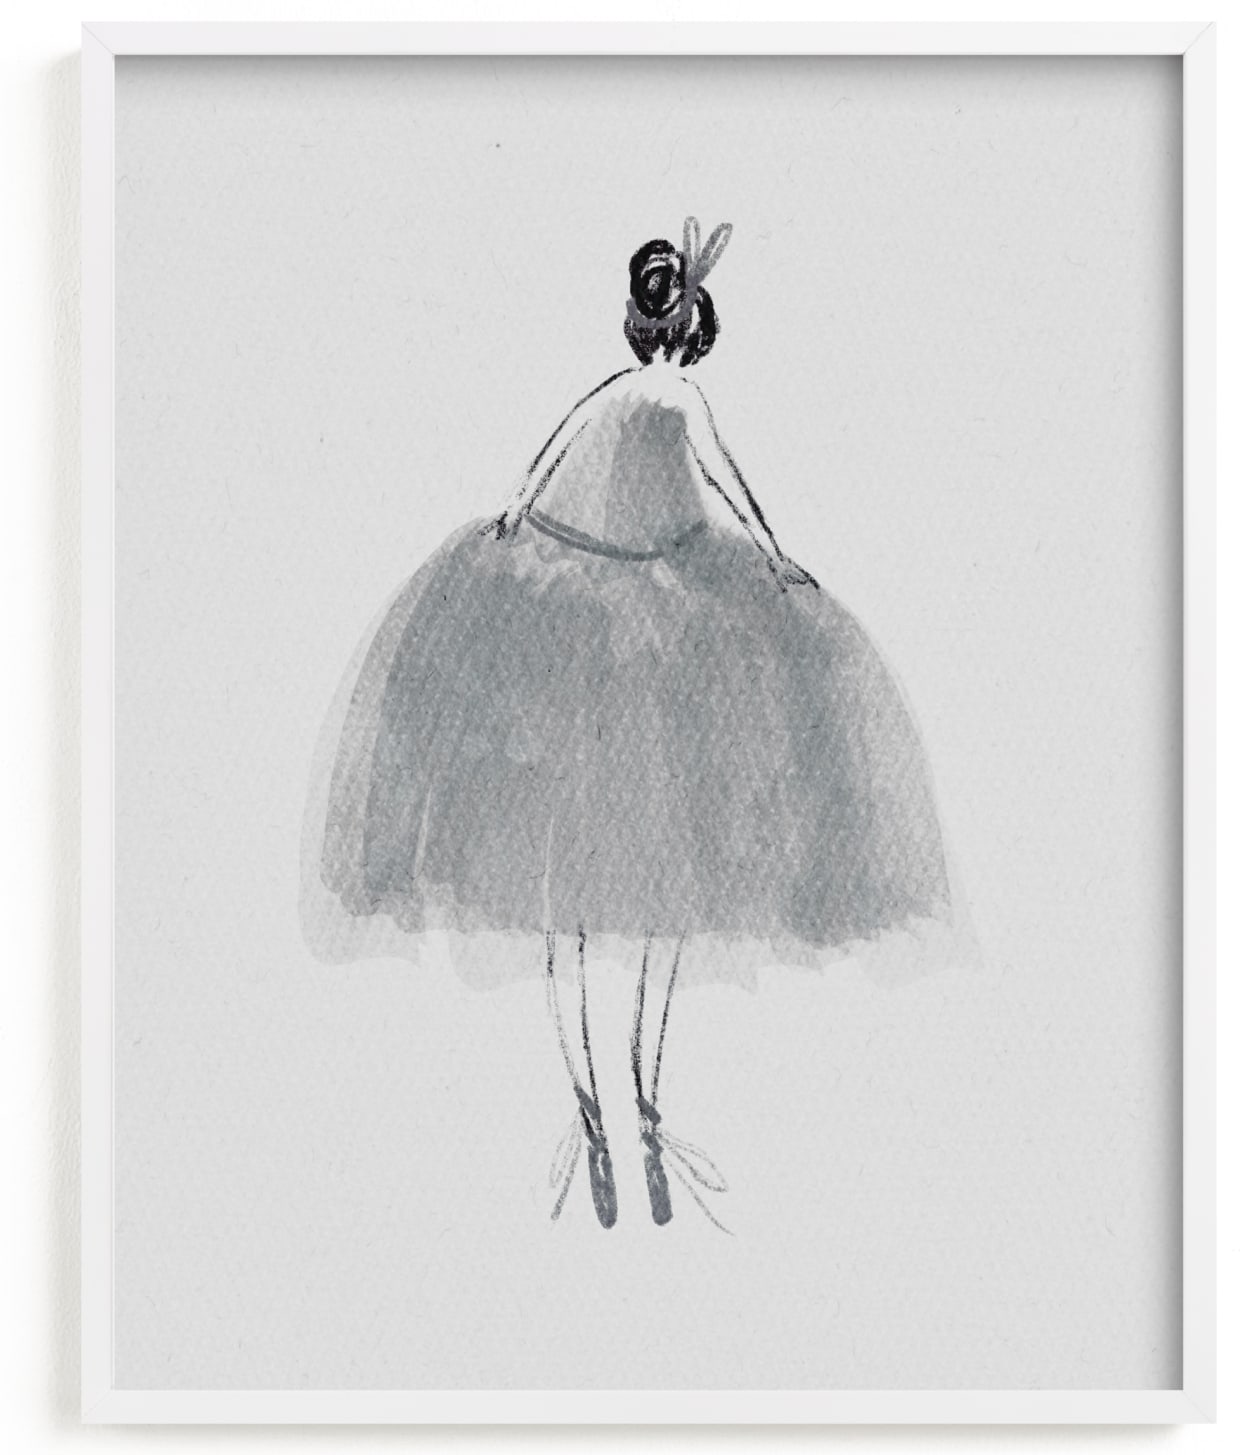 This is a non classic colors kids wall art by Grae called Painted Ballerina.